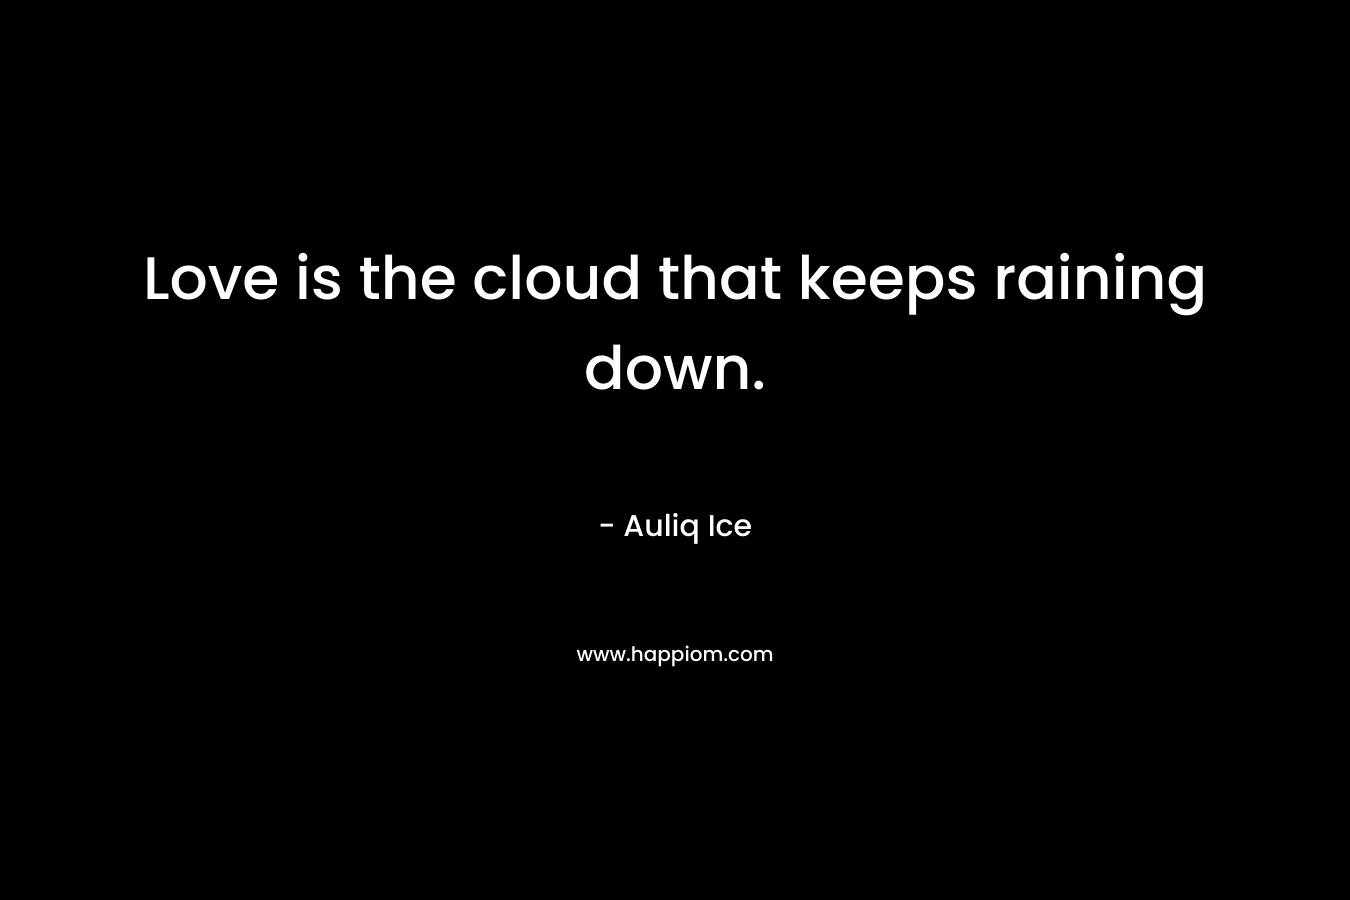 Love is the cloud that keeps raining down.